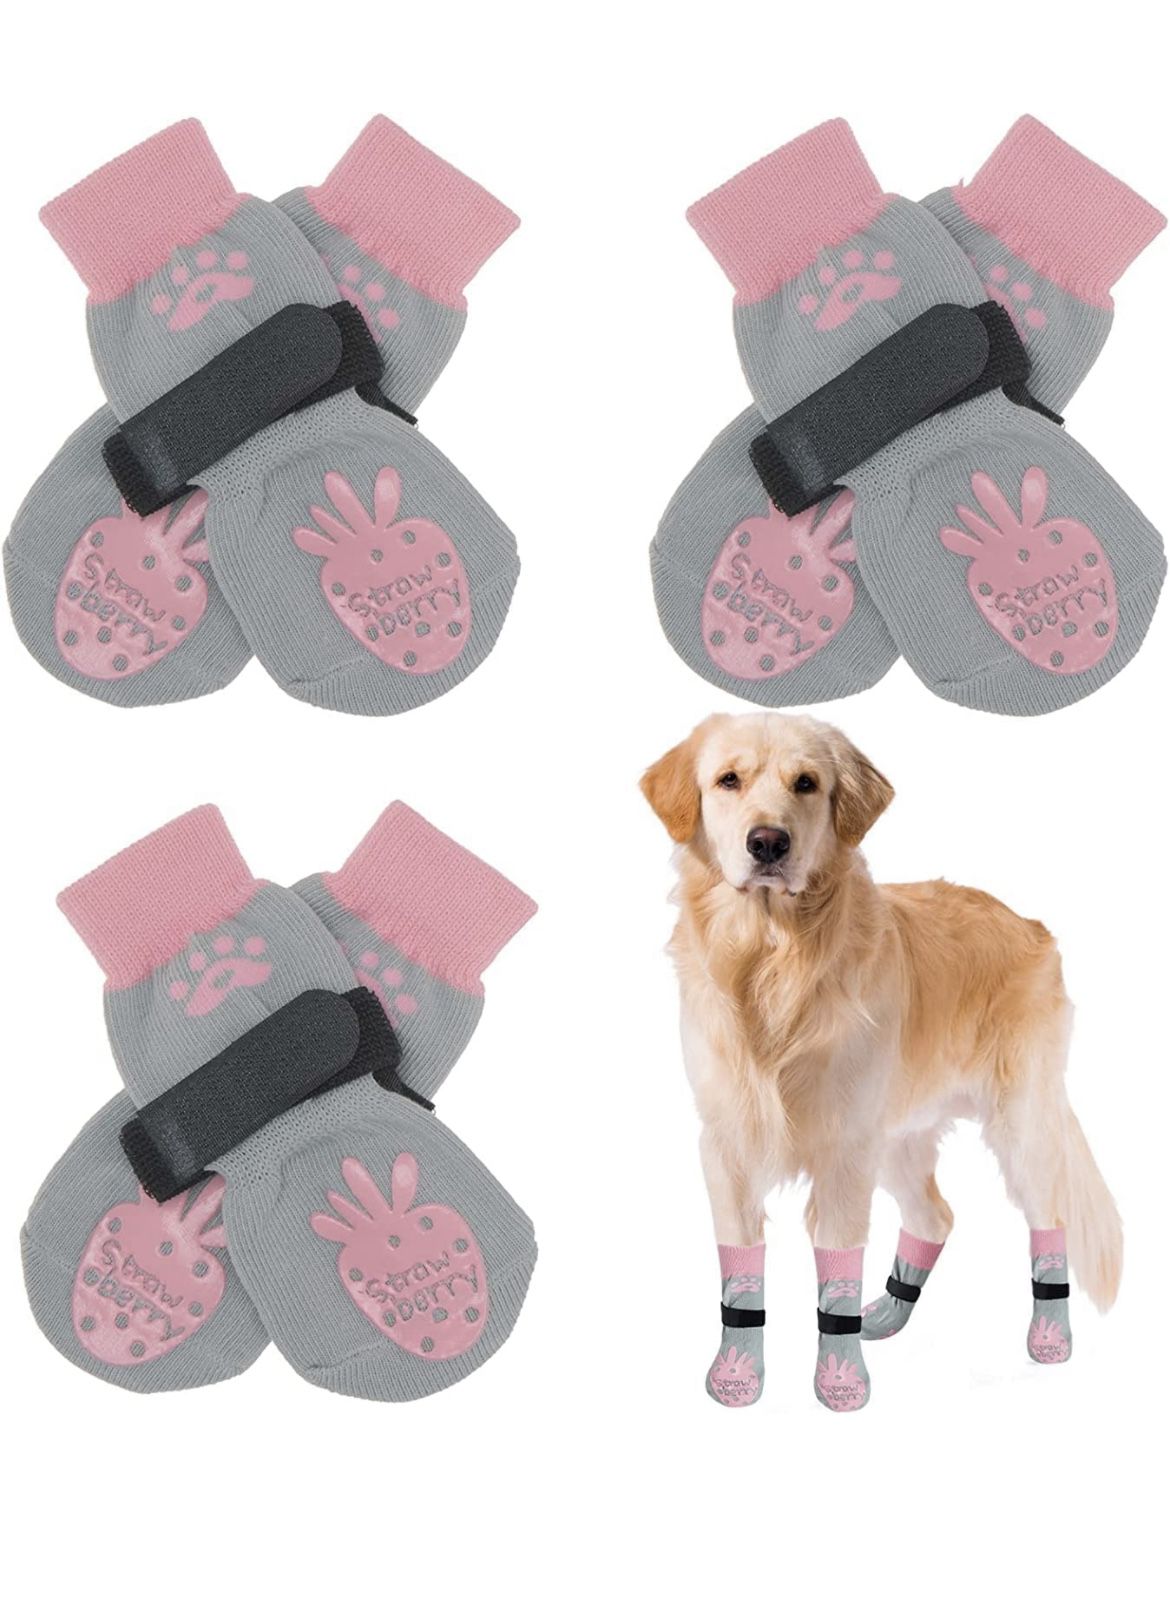 BEAUTYZOO Anti-Slip Dog Socks with Grips Traction Control for Dogs, Non Skid Indoor Double Side Pet Paw Protector for Hardwood Floor Wear (Strawberry,